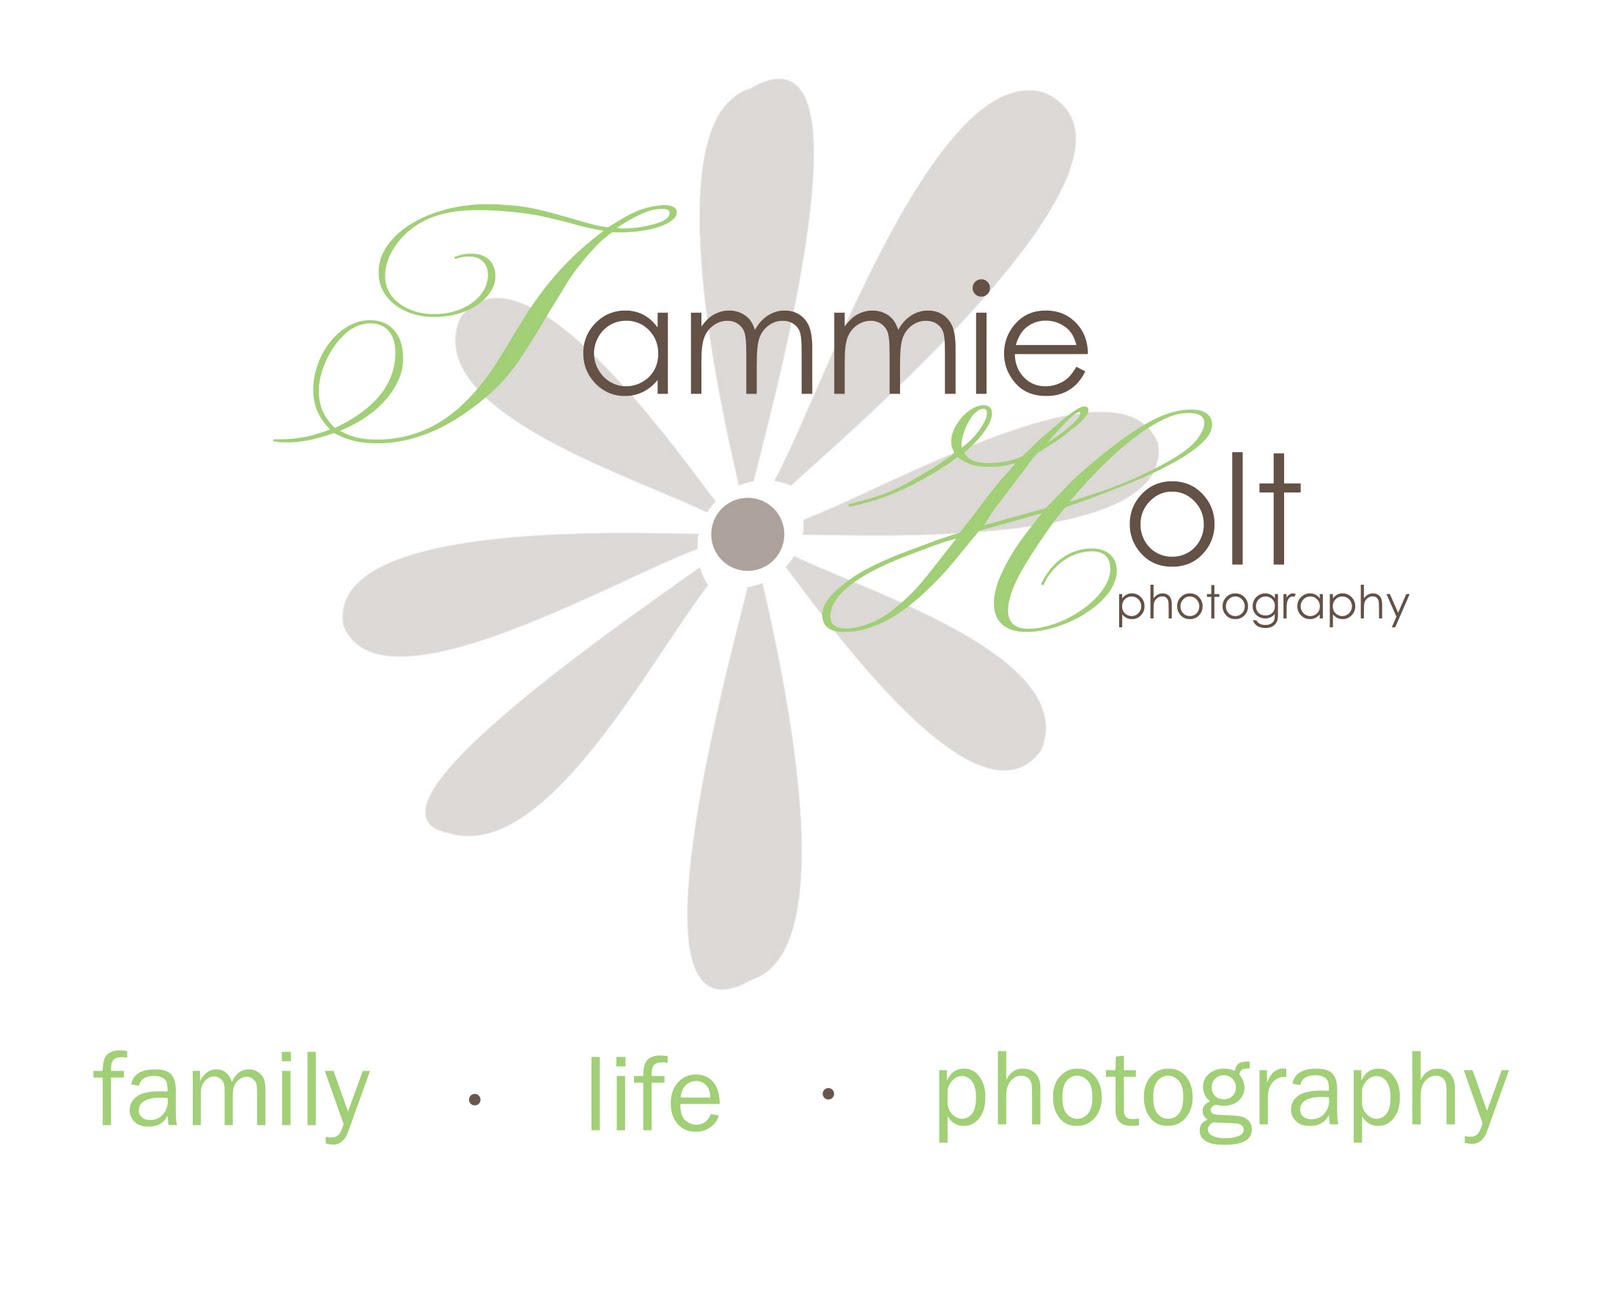 Tammie Holt Photography